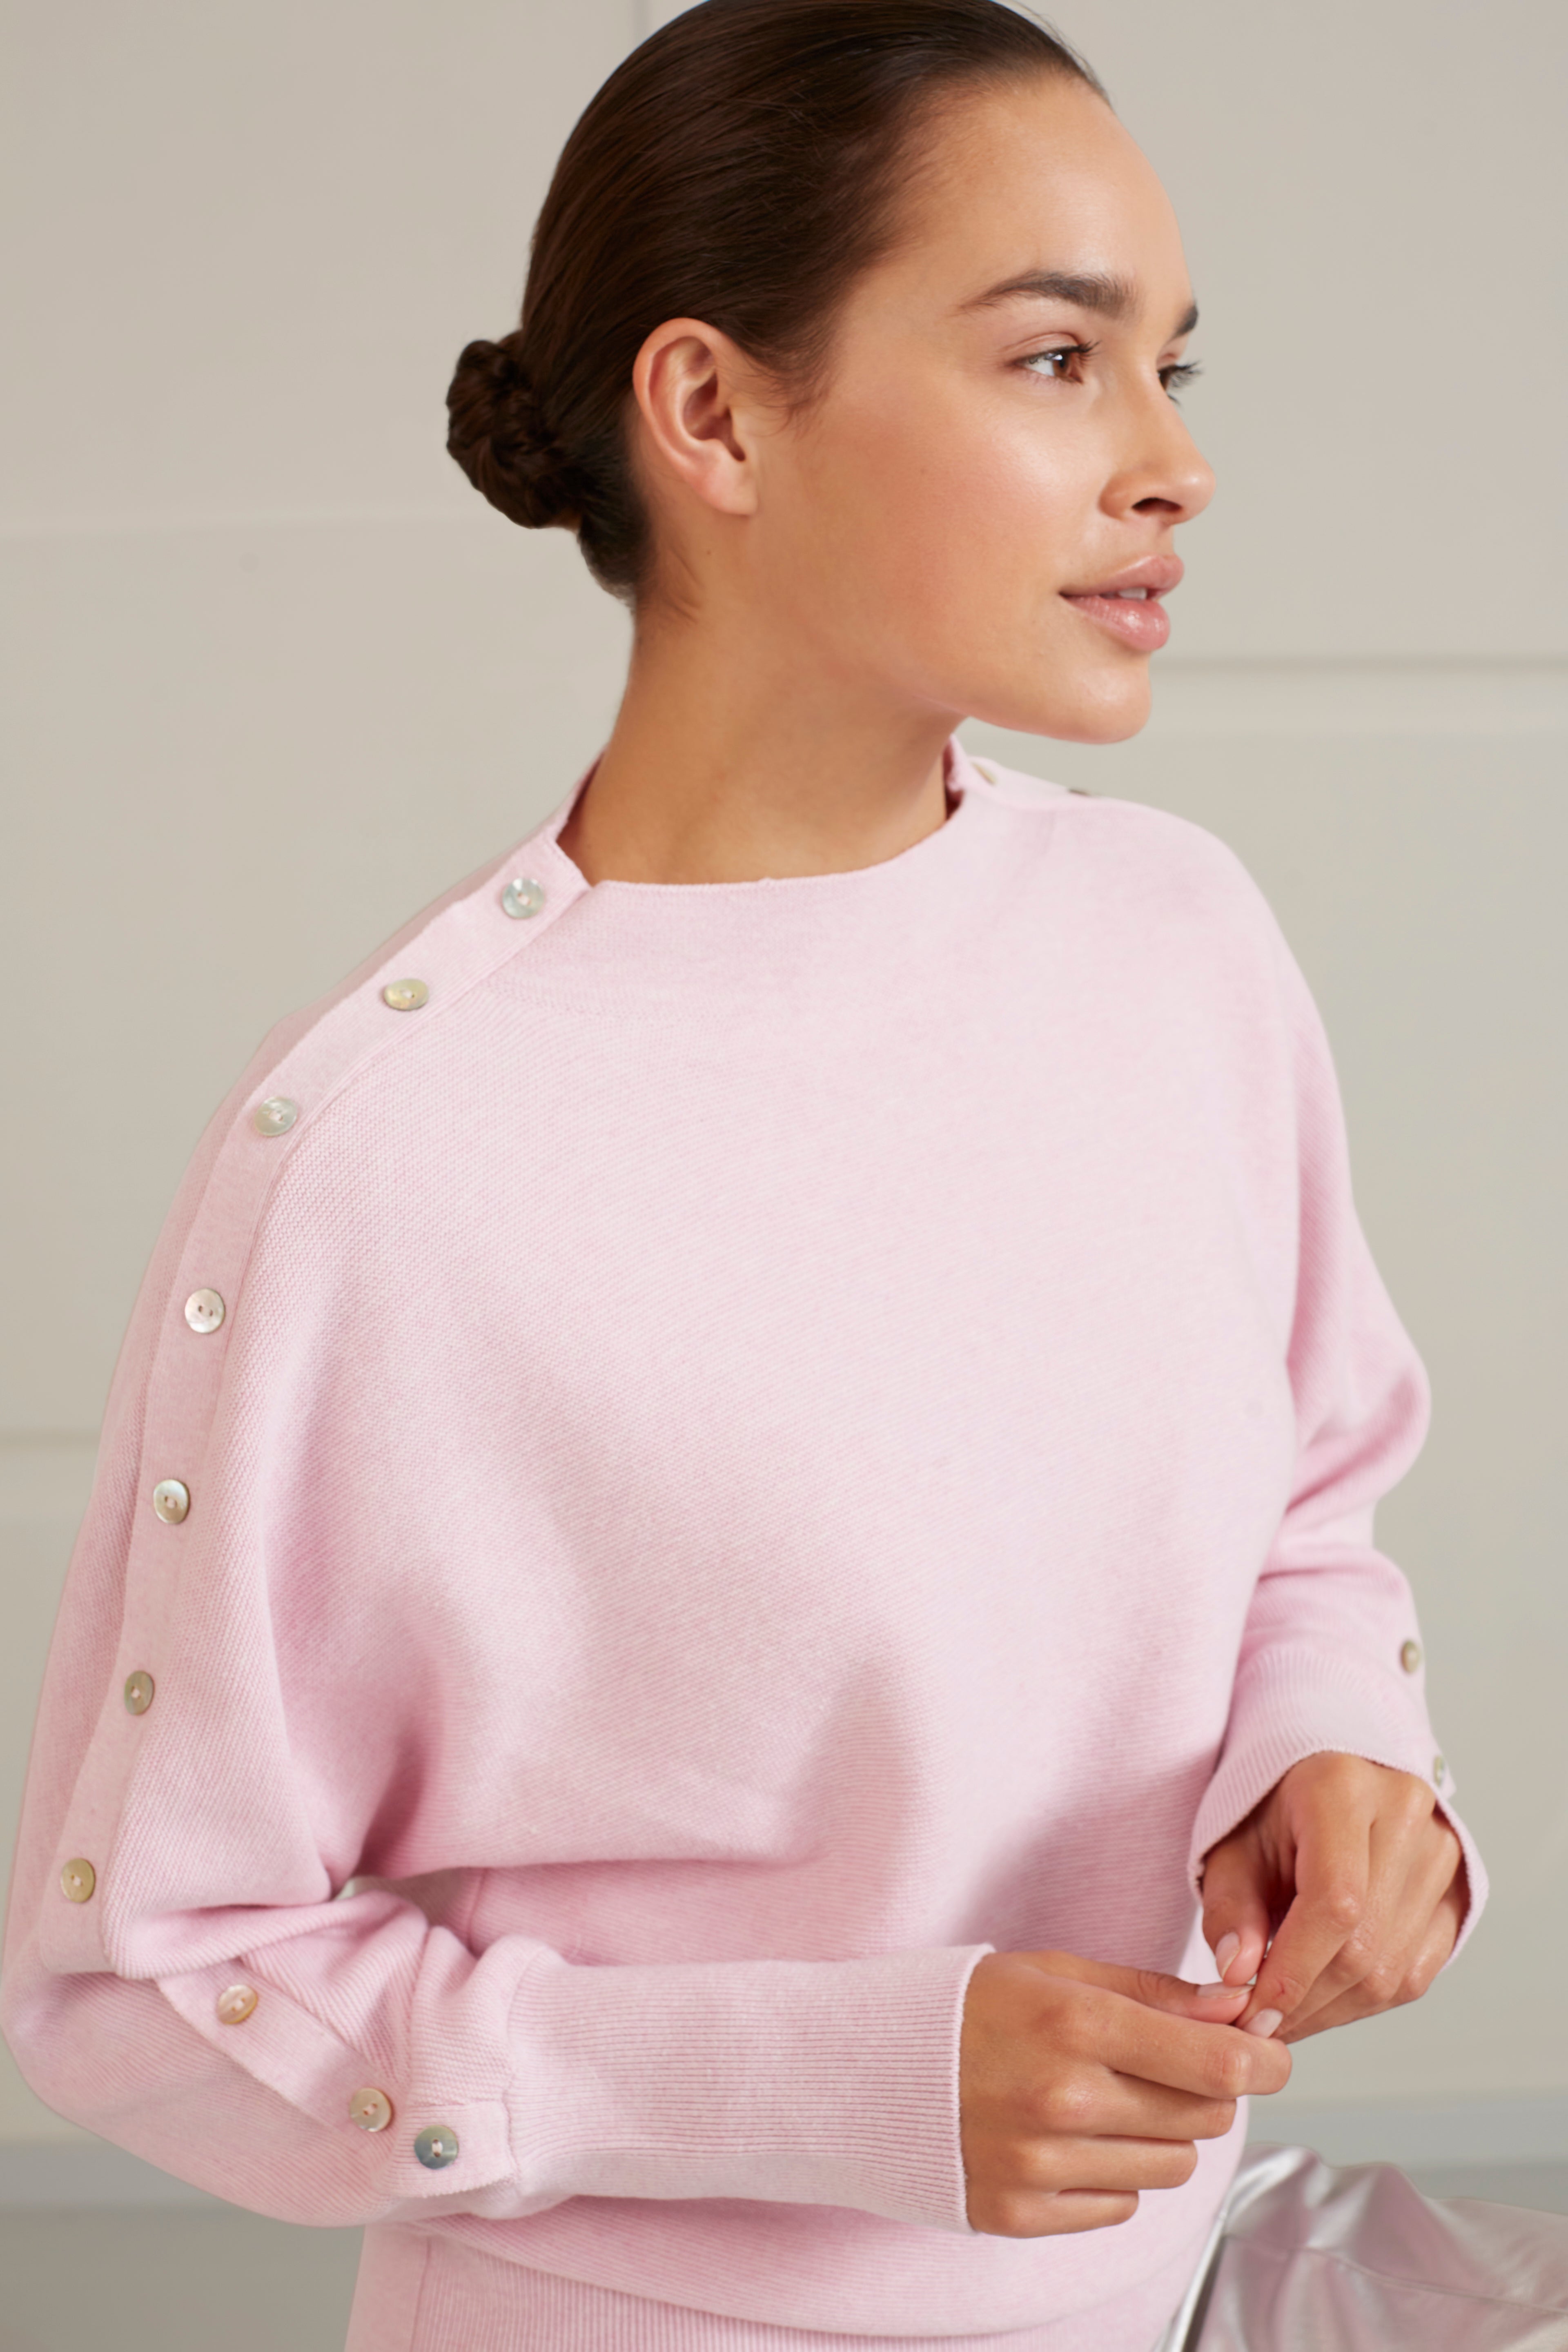 Yaya Button Detail Sweater - Lady Pink Clothing - Tops - Sweaters - Pullovers - Fine Gauge Pullovers by Yaya | Grace the Boutique